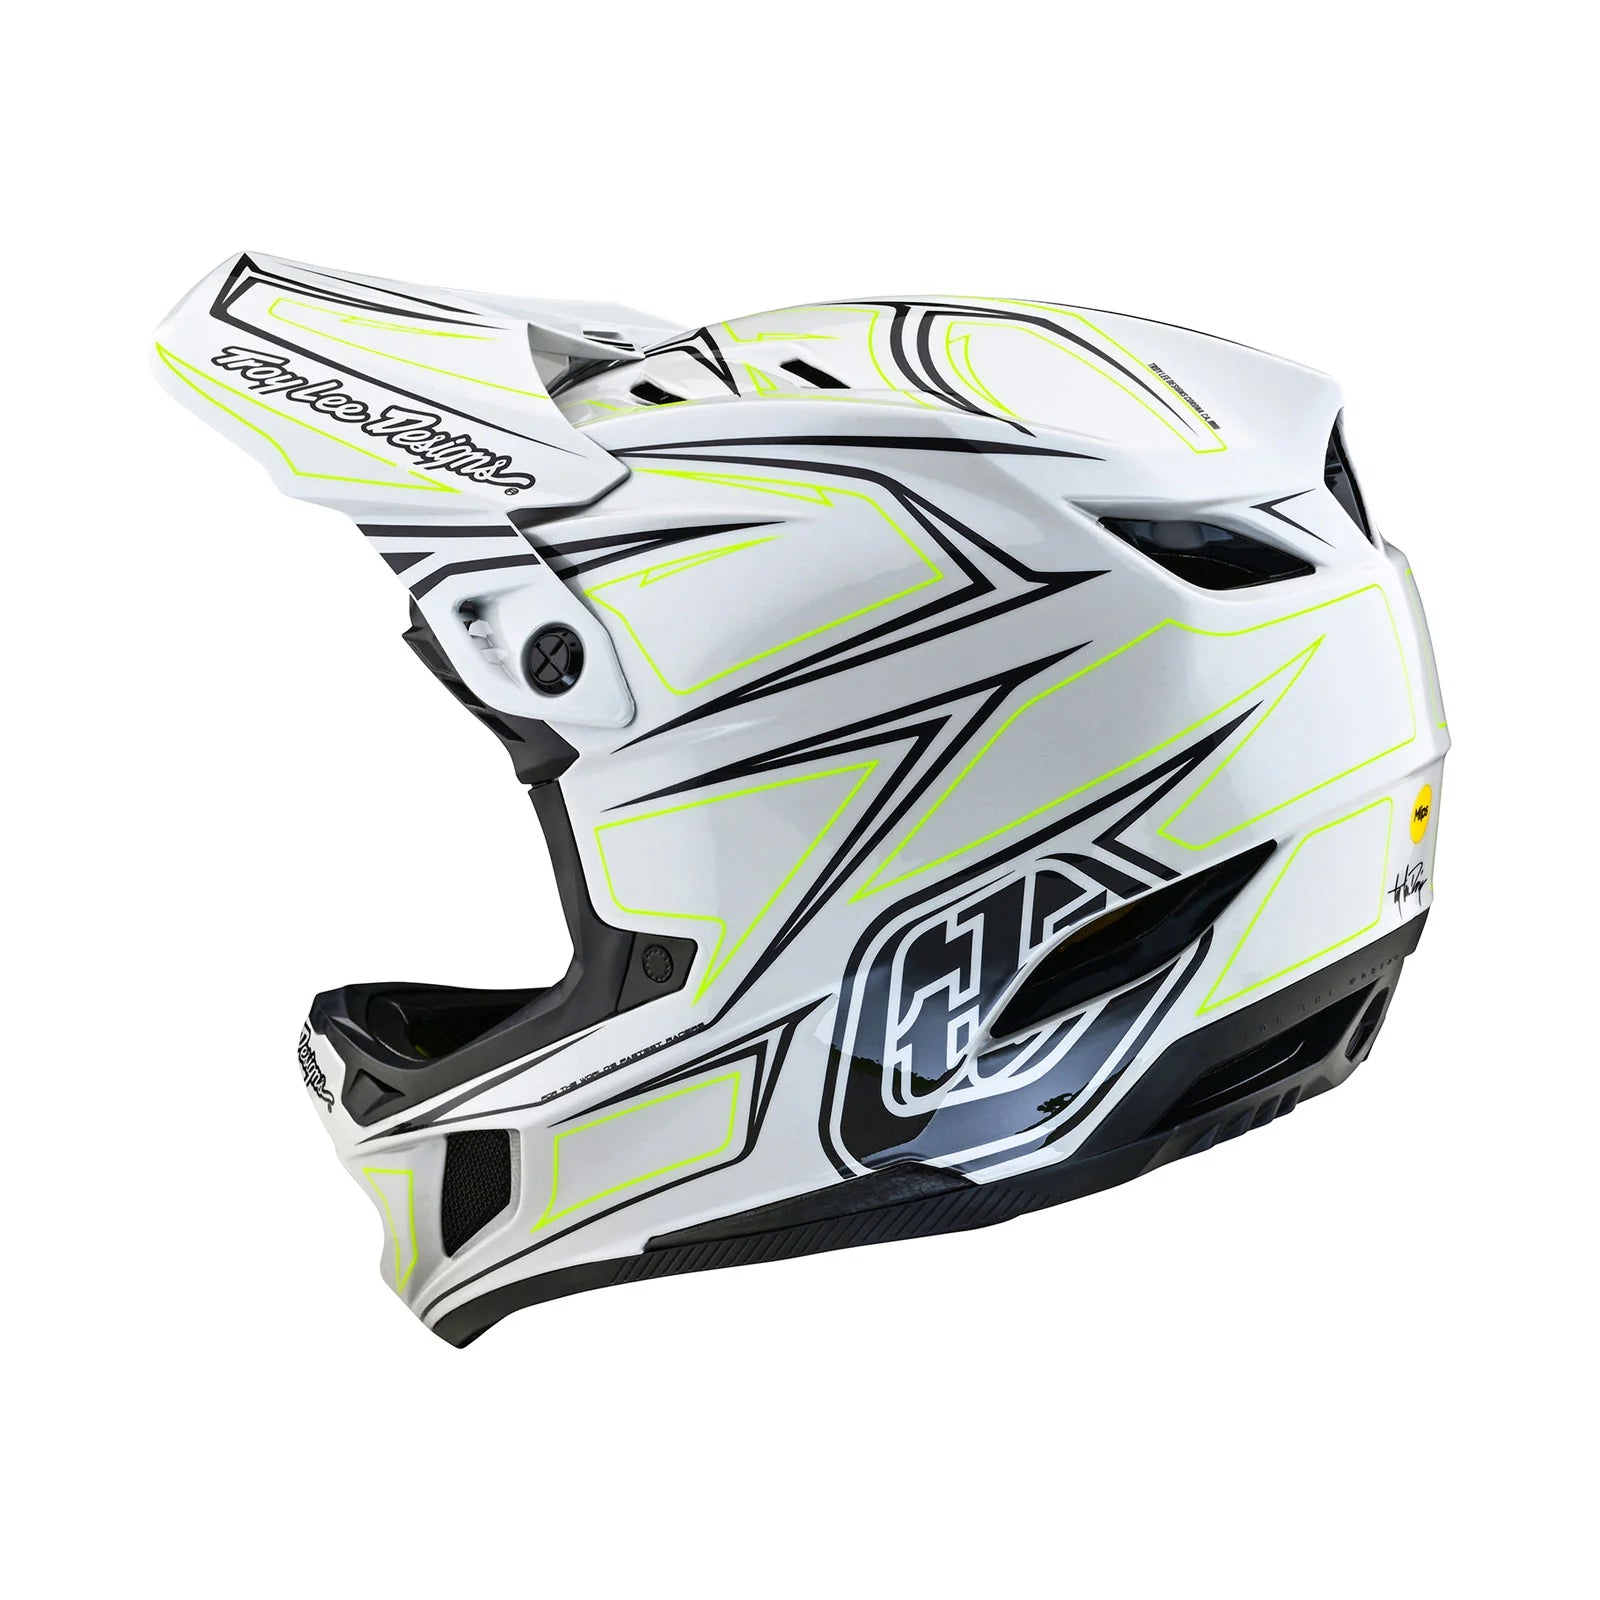 A white and yellow TLD D4 AS Composite helmet with MIPS Pinned Light Grey protection system on a white background.